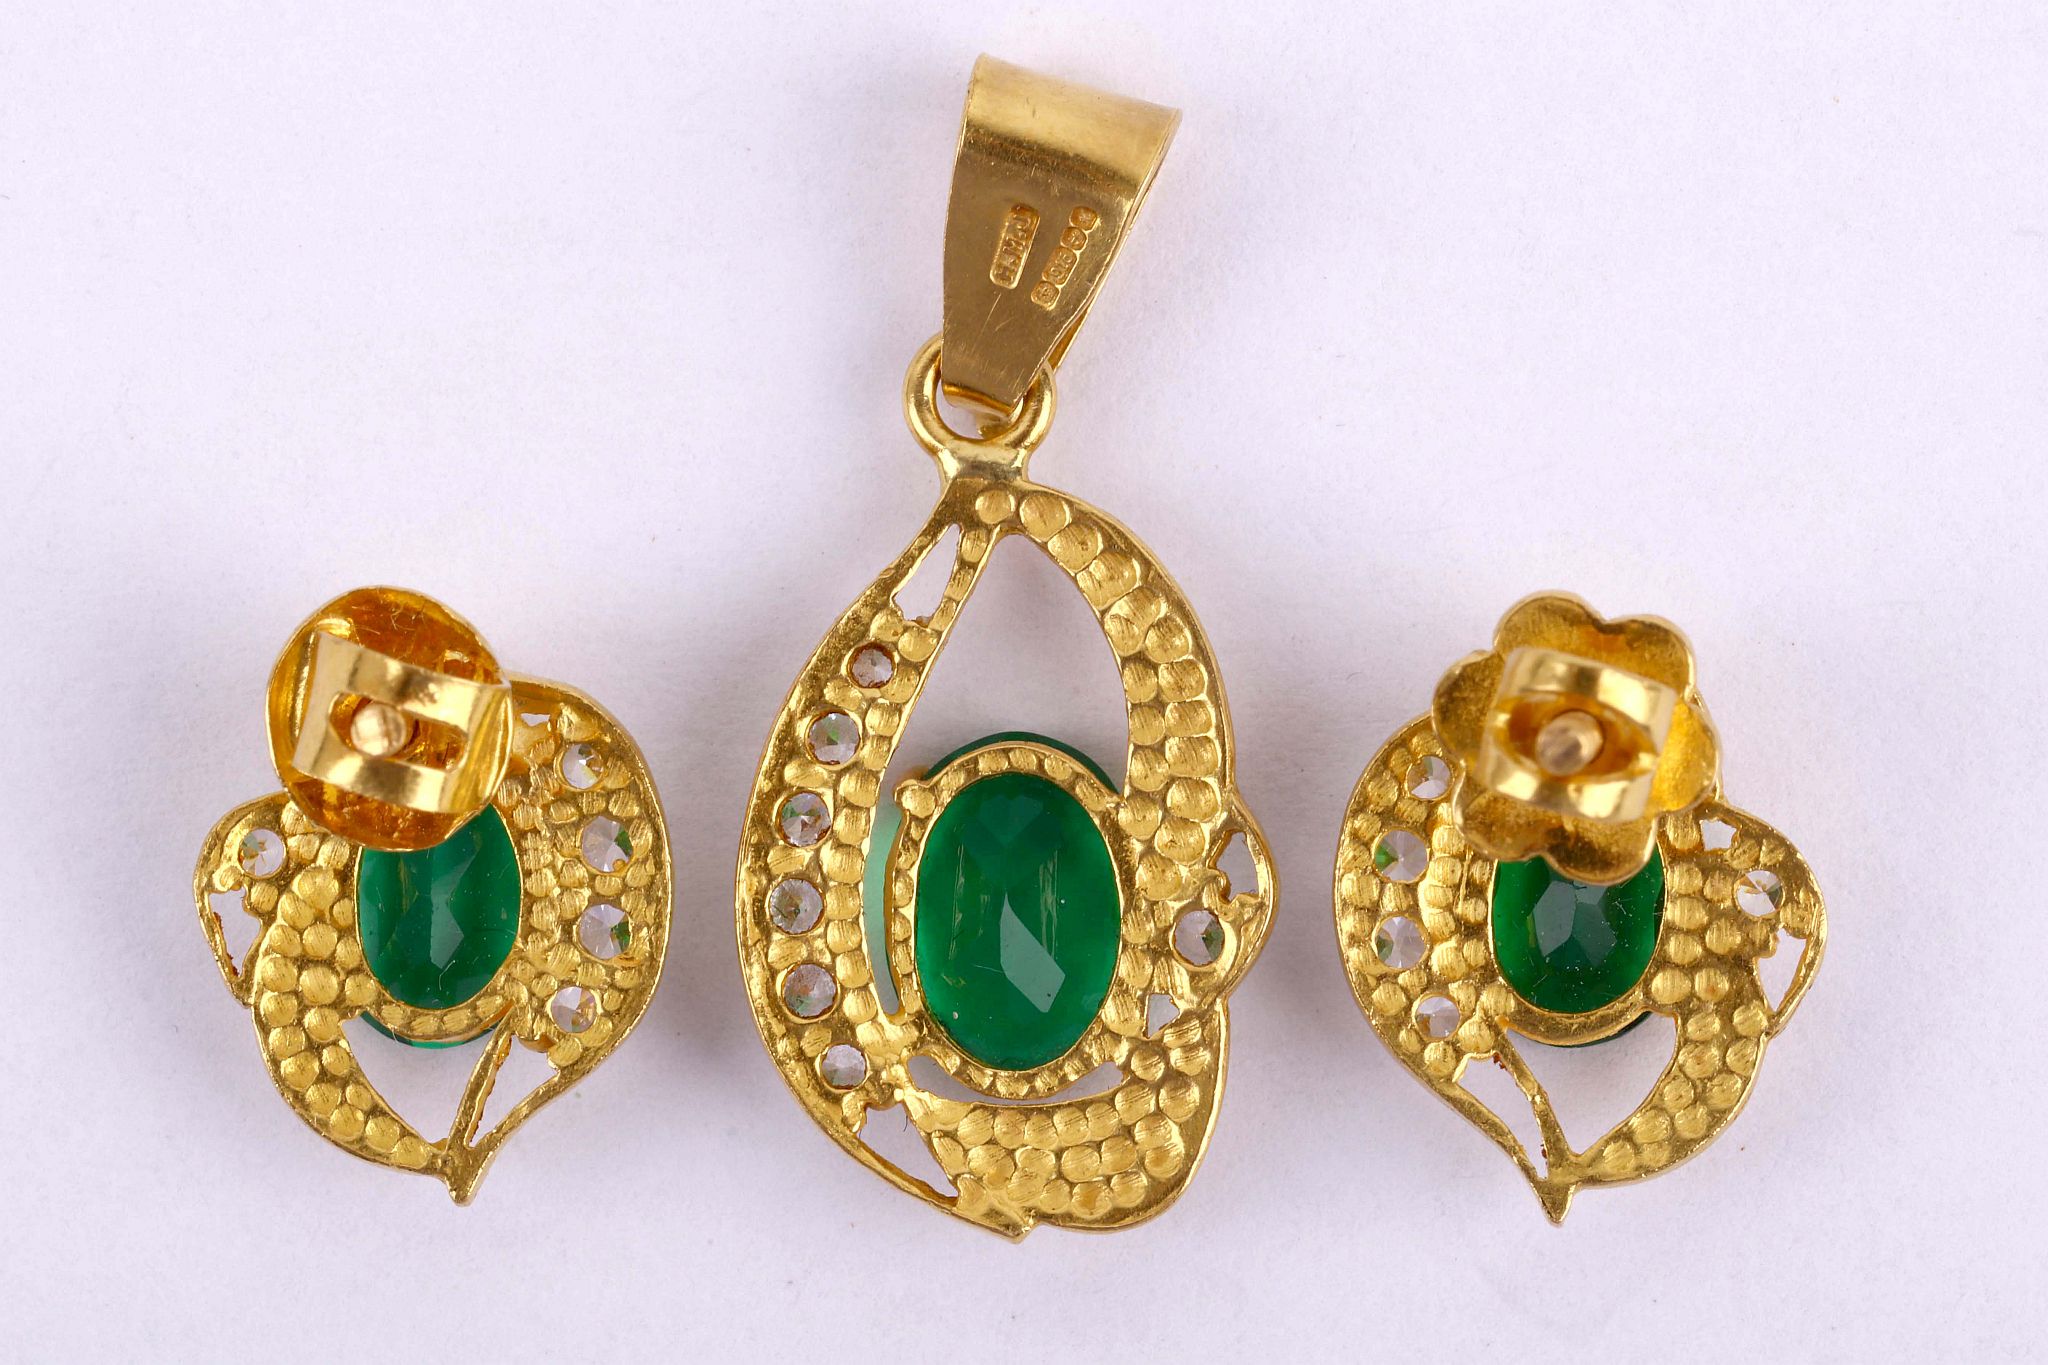 A 22 carat gold, synthetic emerald and imitation diamond pendant and earring suite, UK hallmarks, - Image 2 of 2